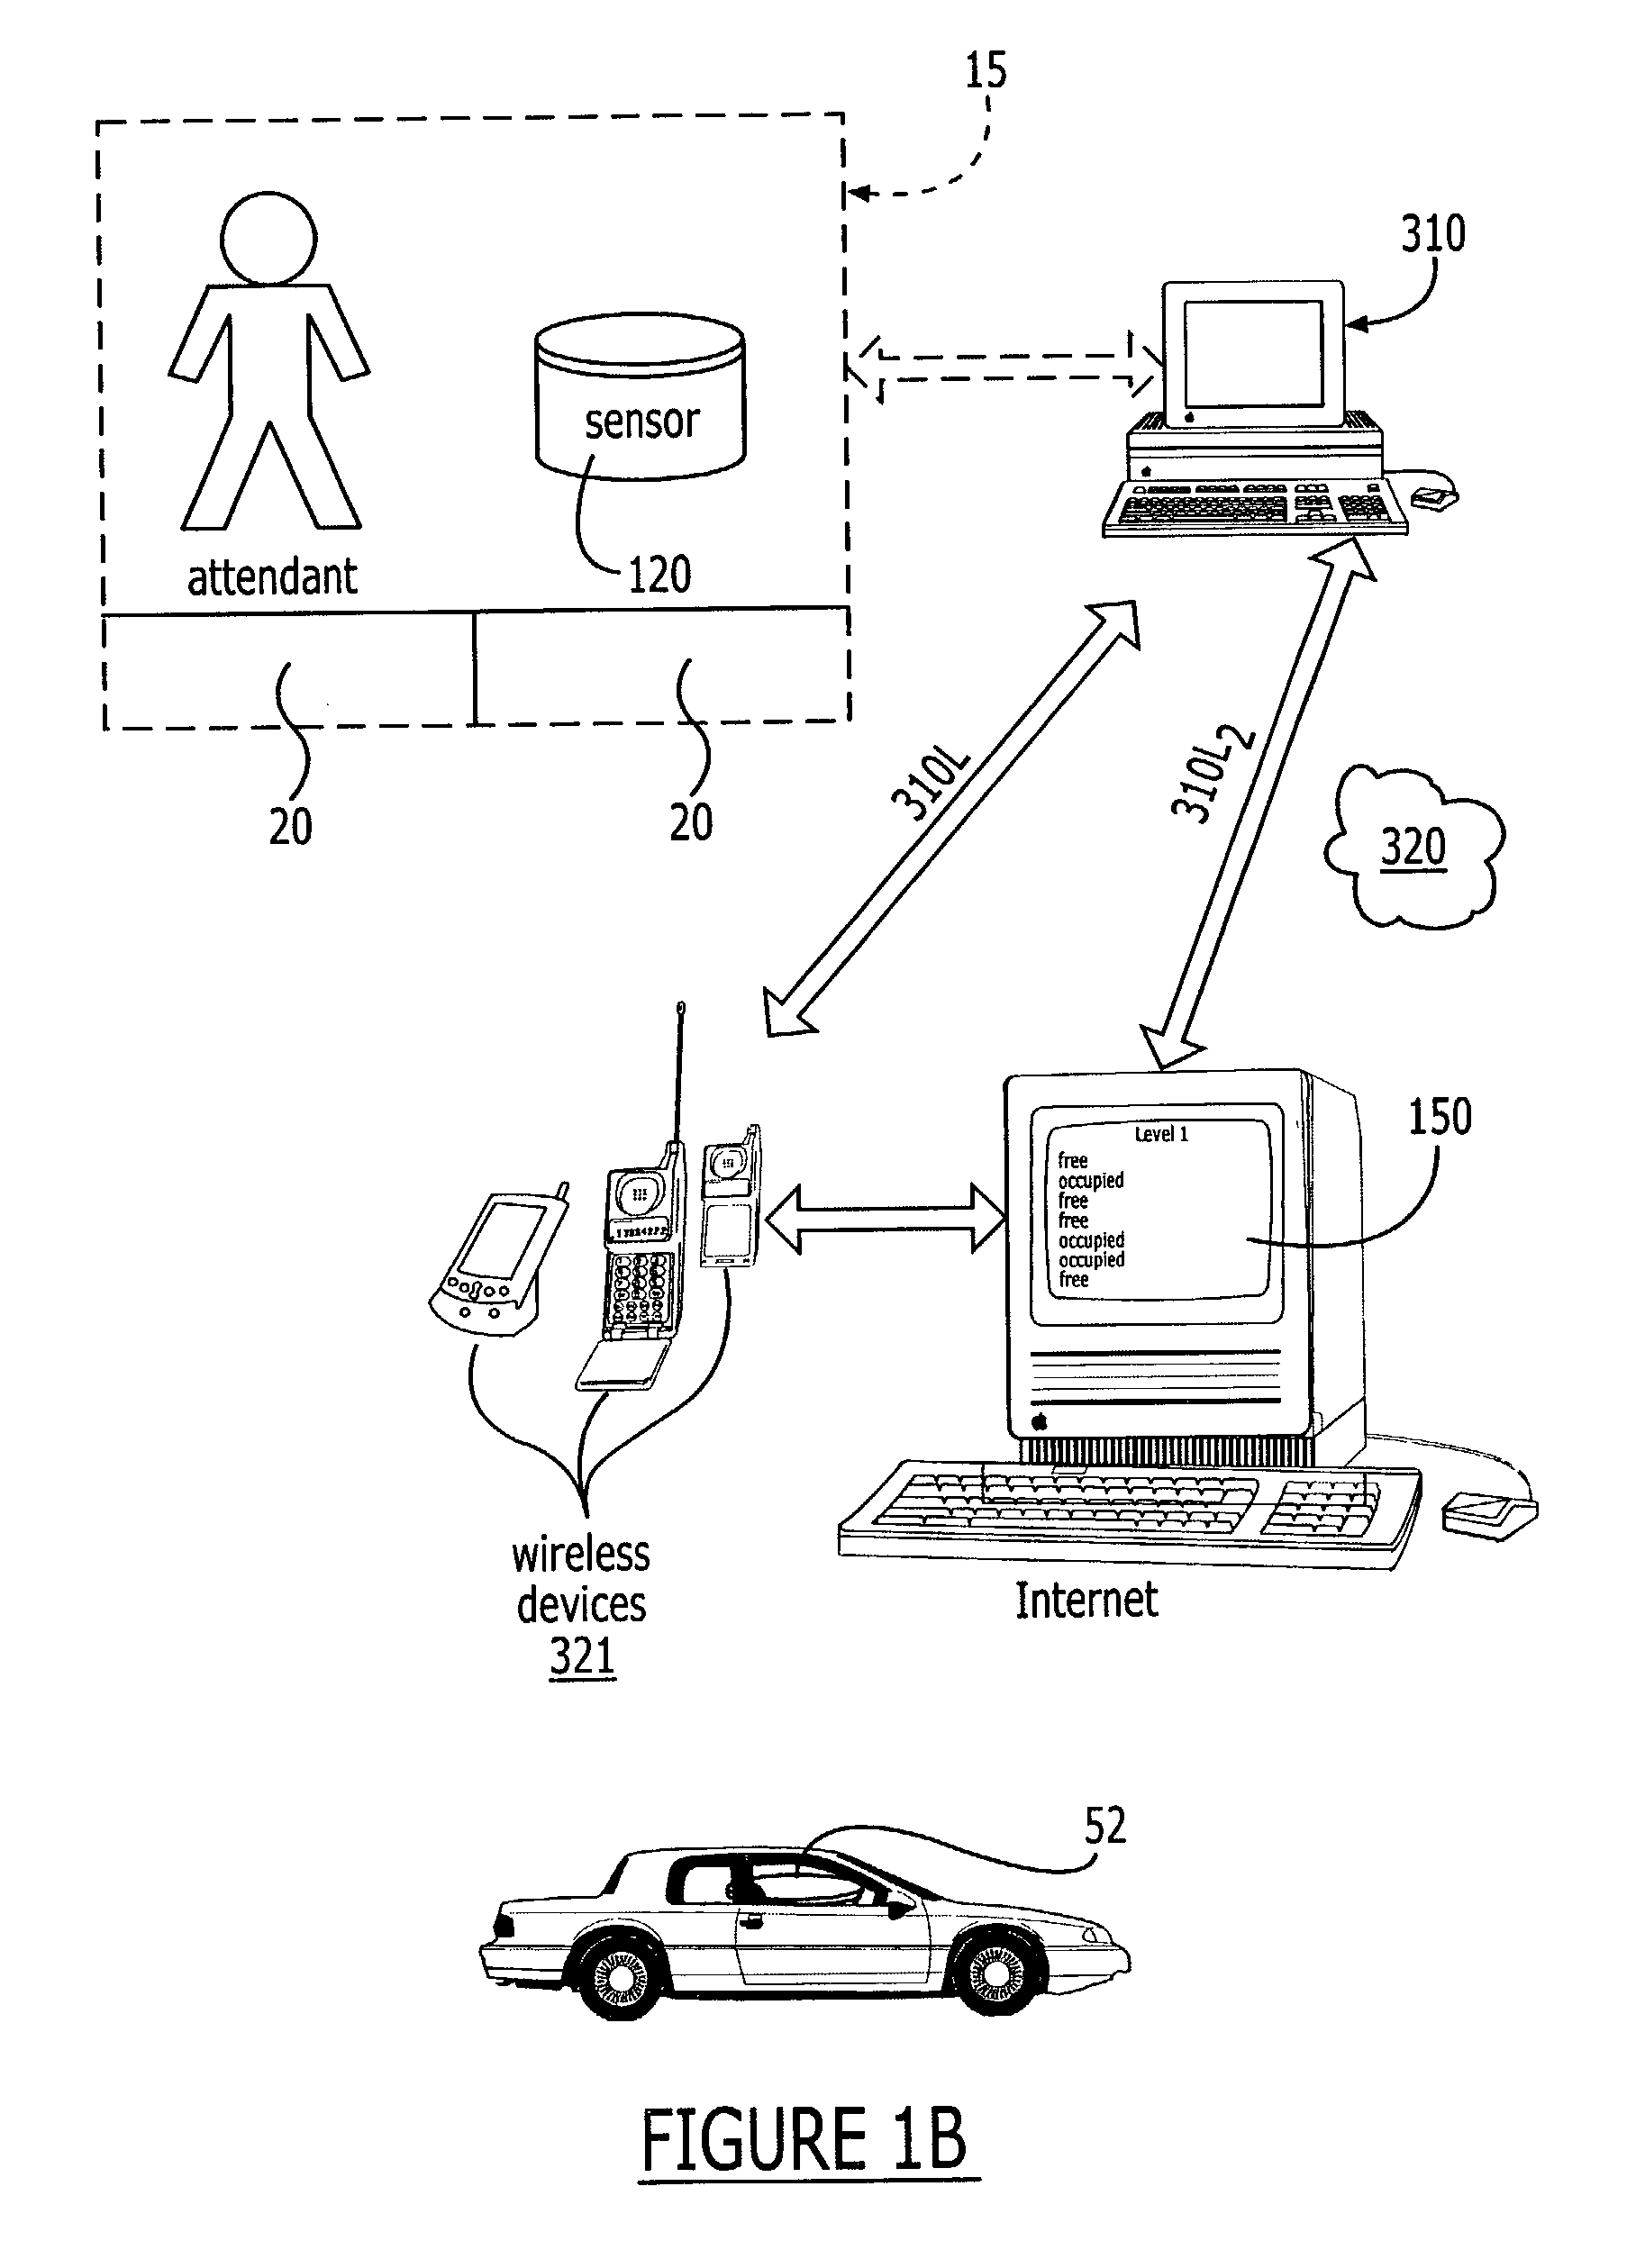 Parking reservation systems and related methods